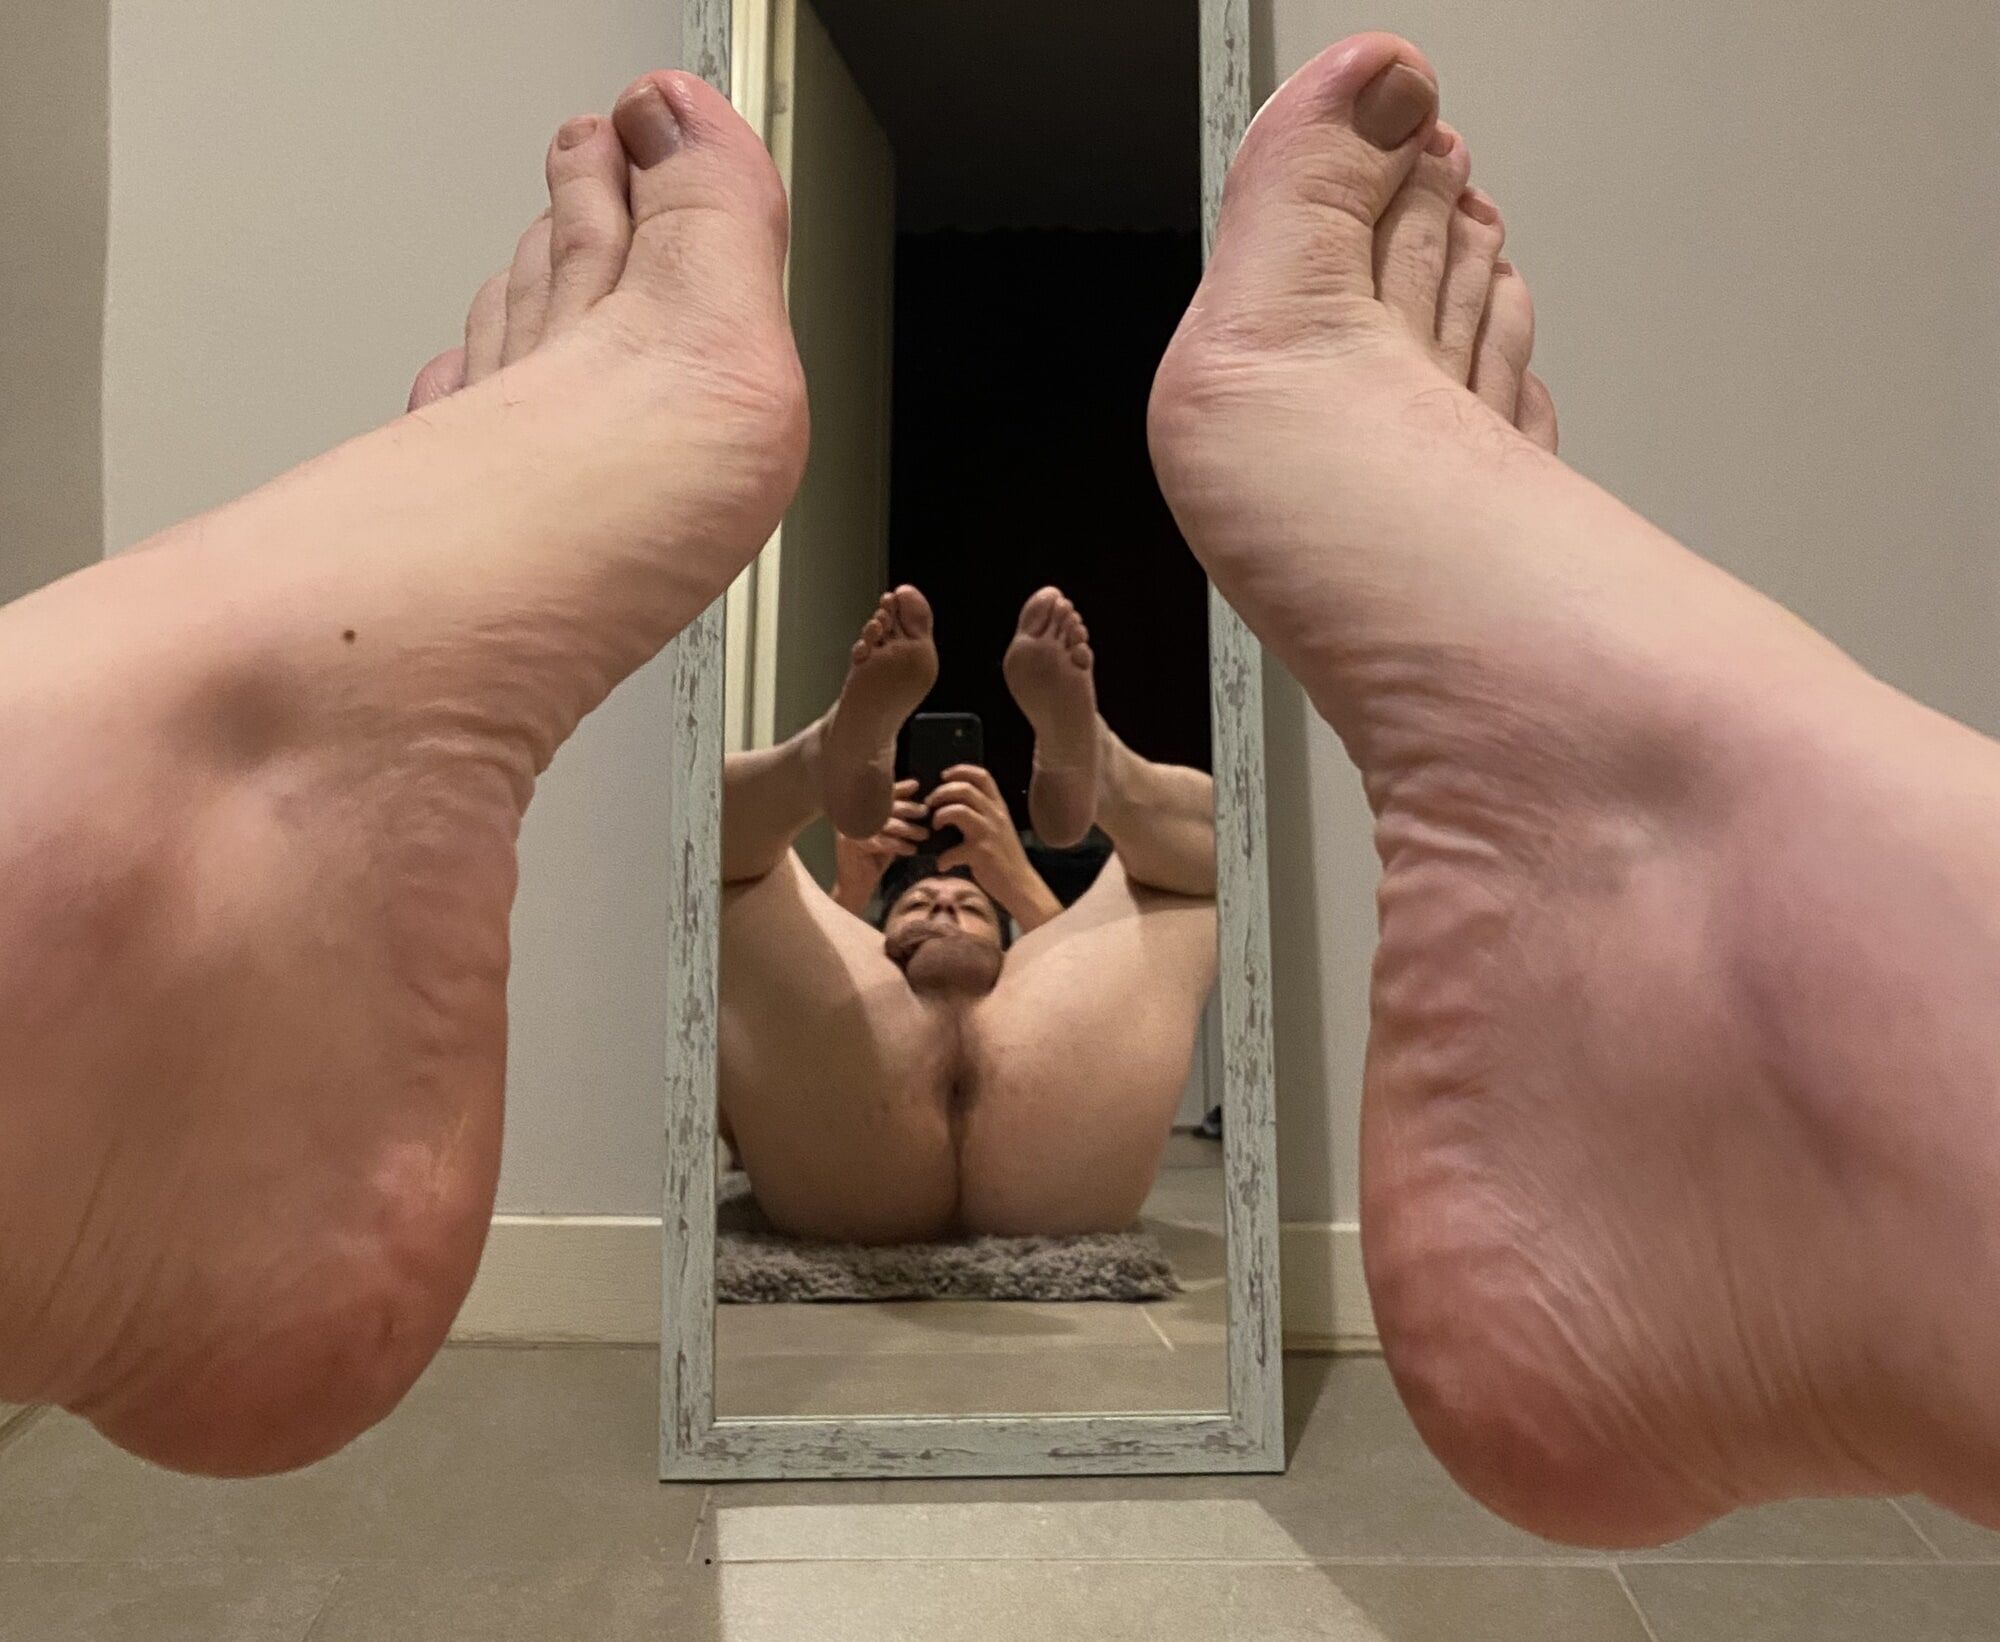 Love to see my feet in the mirror #4